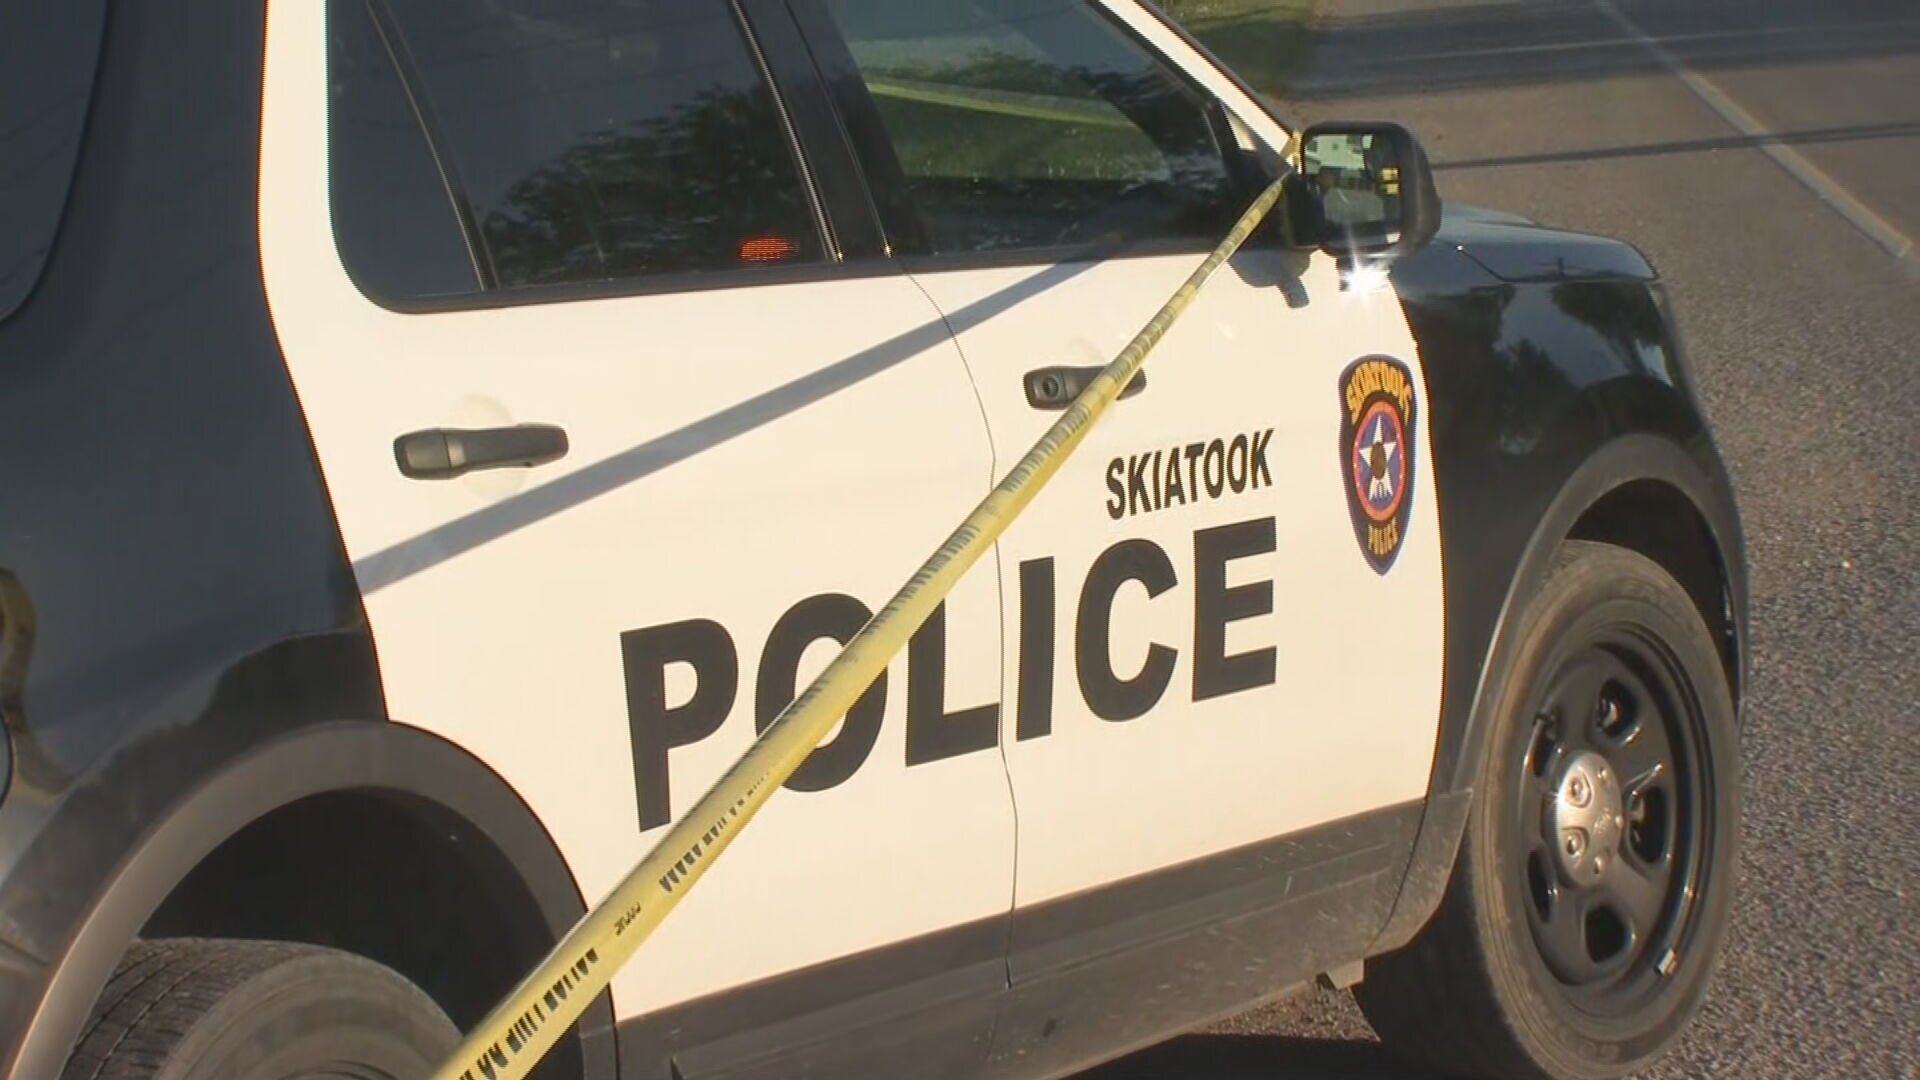 1 Hospitalized After Shooting At Mobile Home Park In Skiatook 